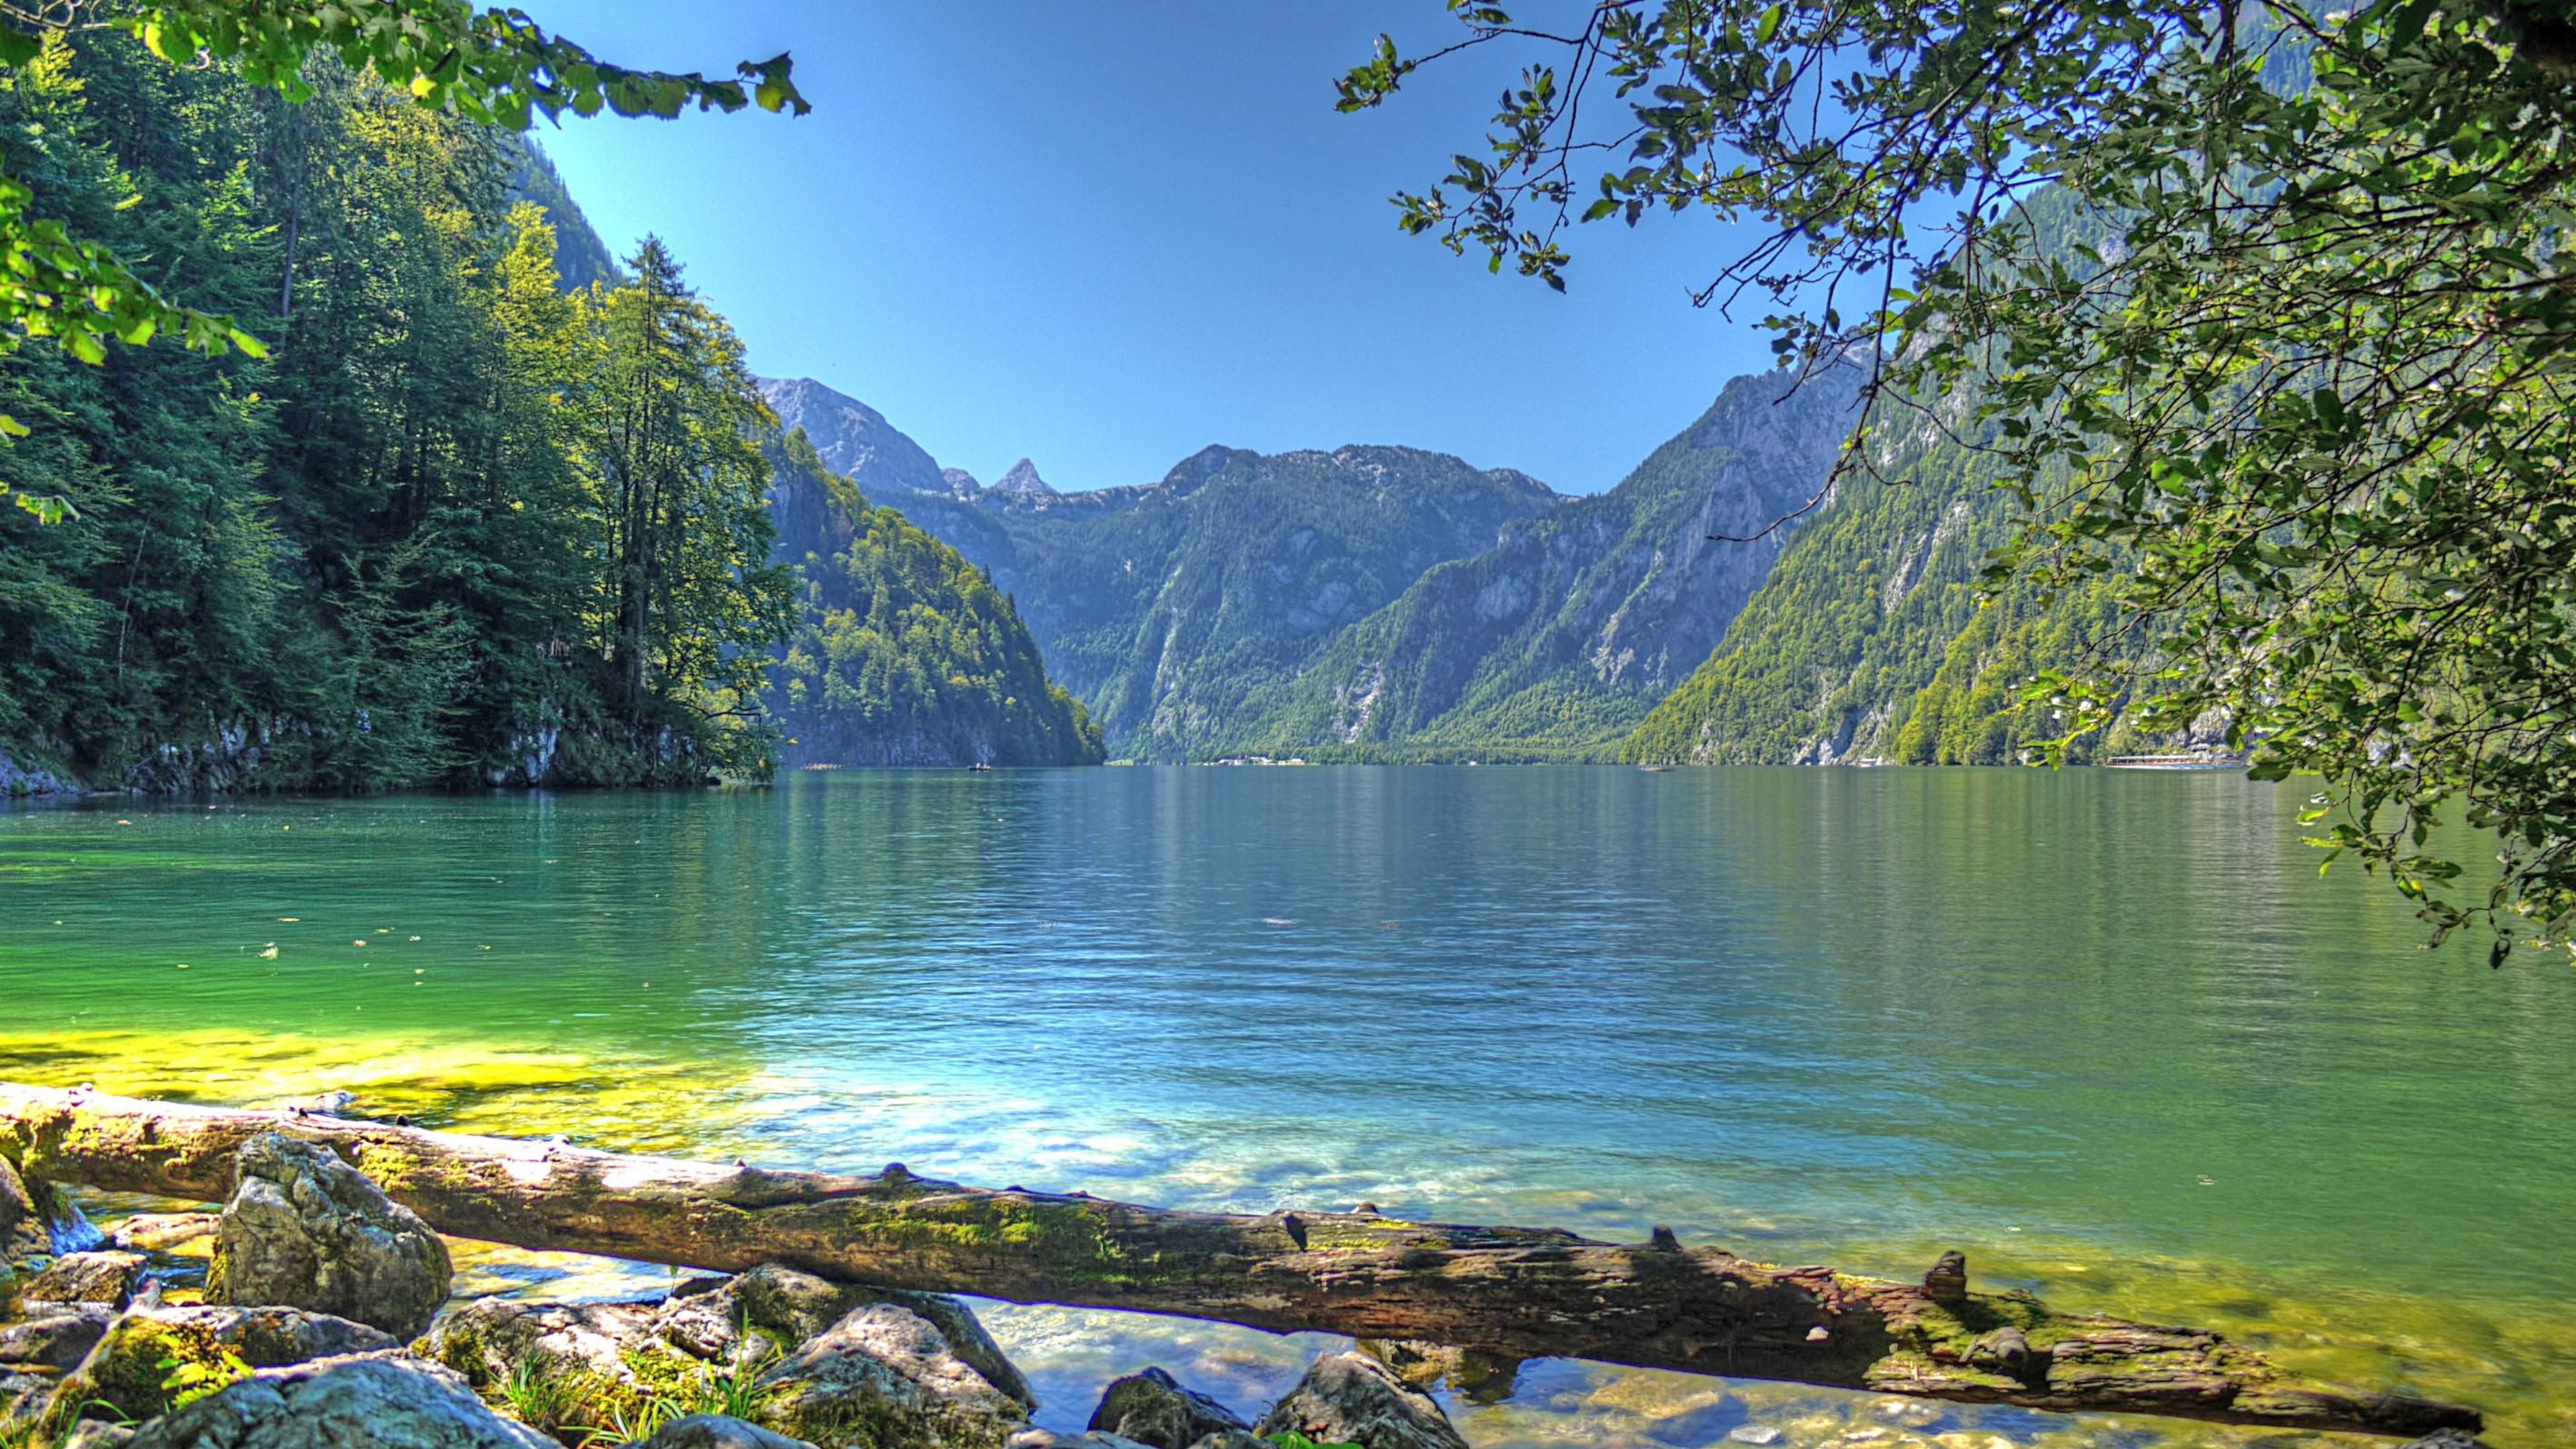 Königssee Mountain Lake Known As The Cleanest Lake In Germany Two